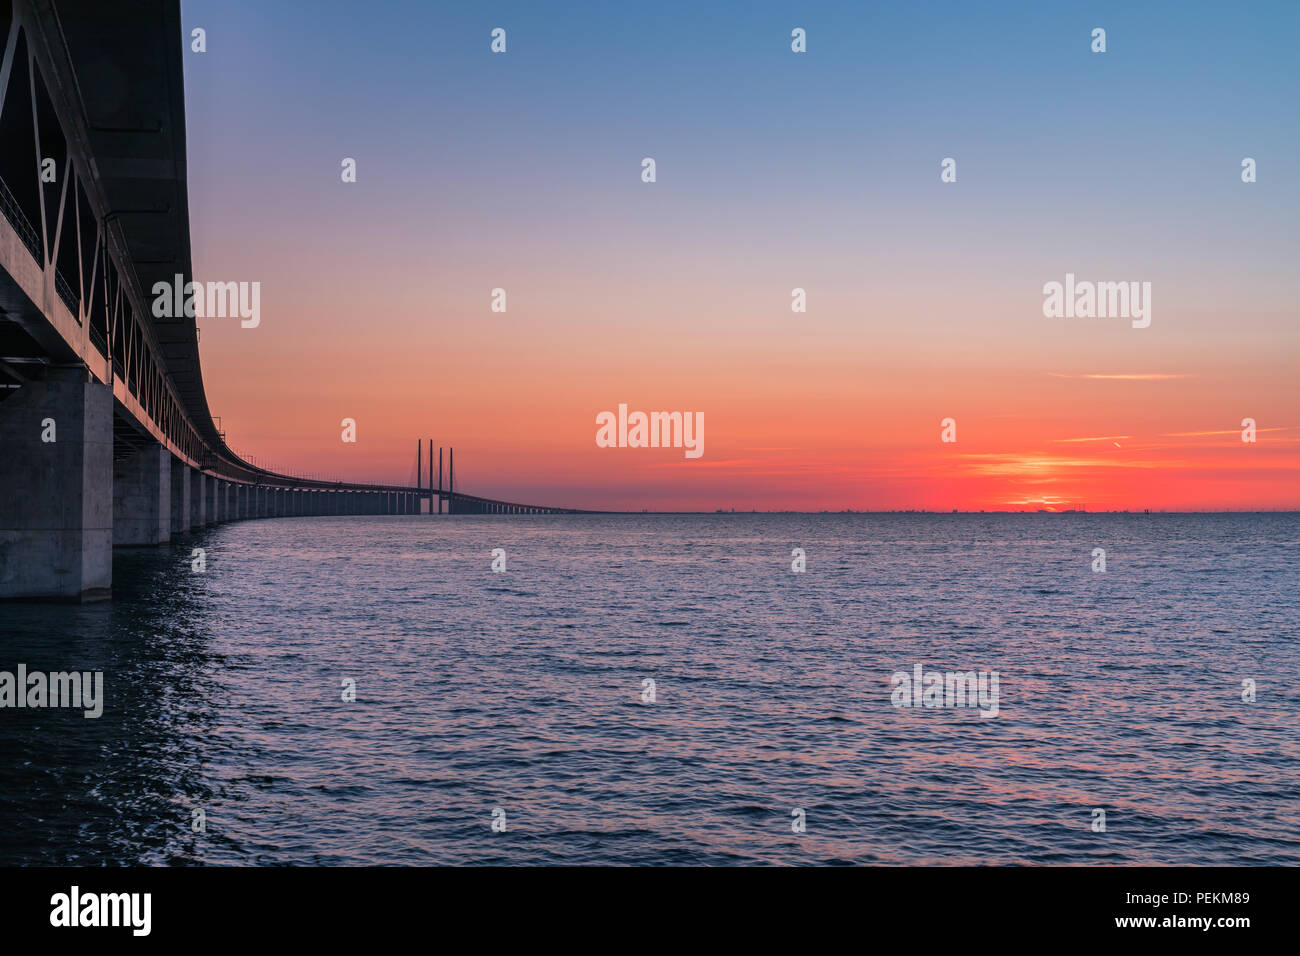 The Oresund Bridge is the longest combined road and rail bridge in Europe and connects two major cities: Copenhagen and Malmo. Stock Photo